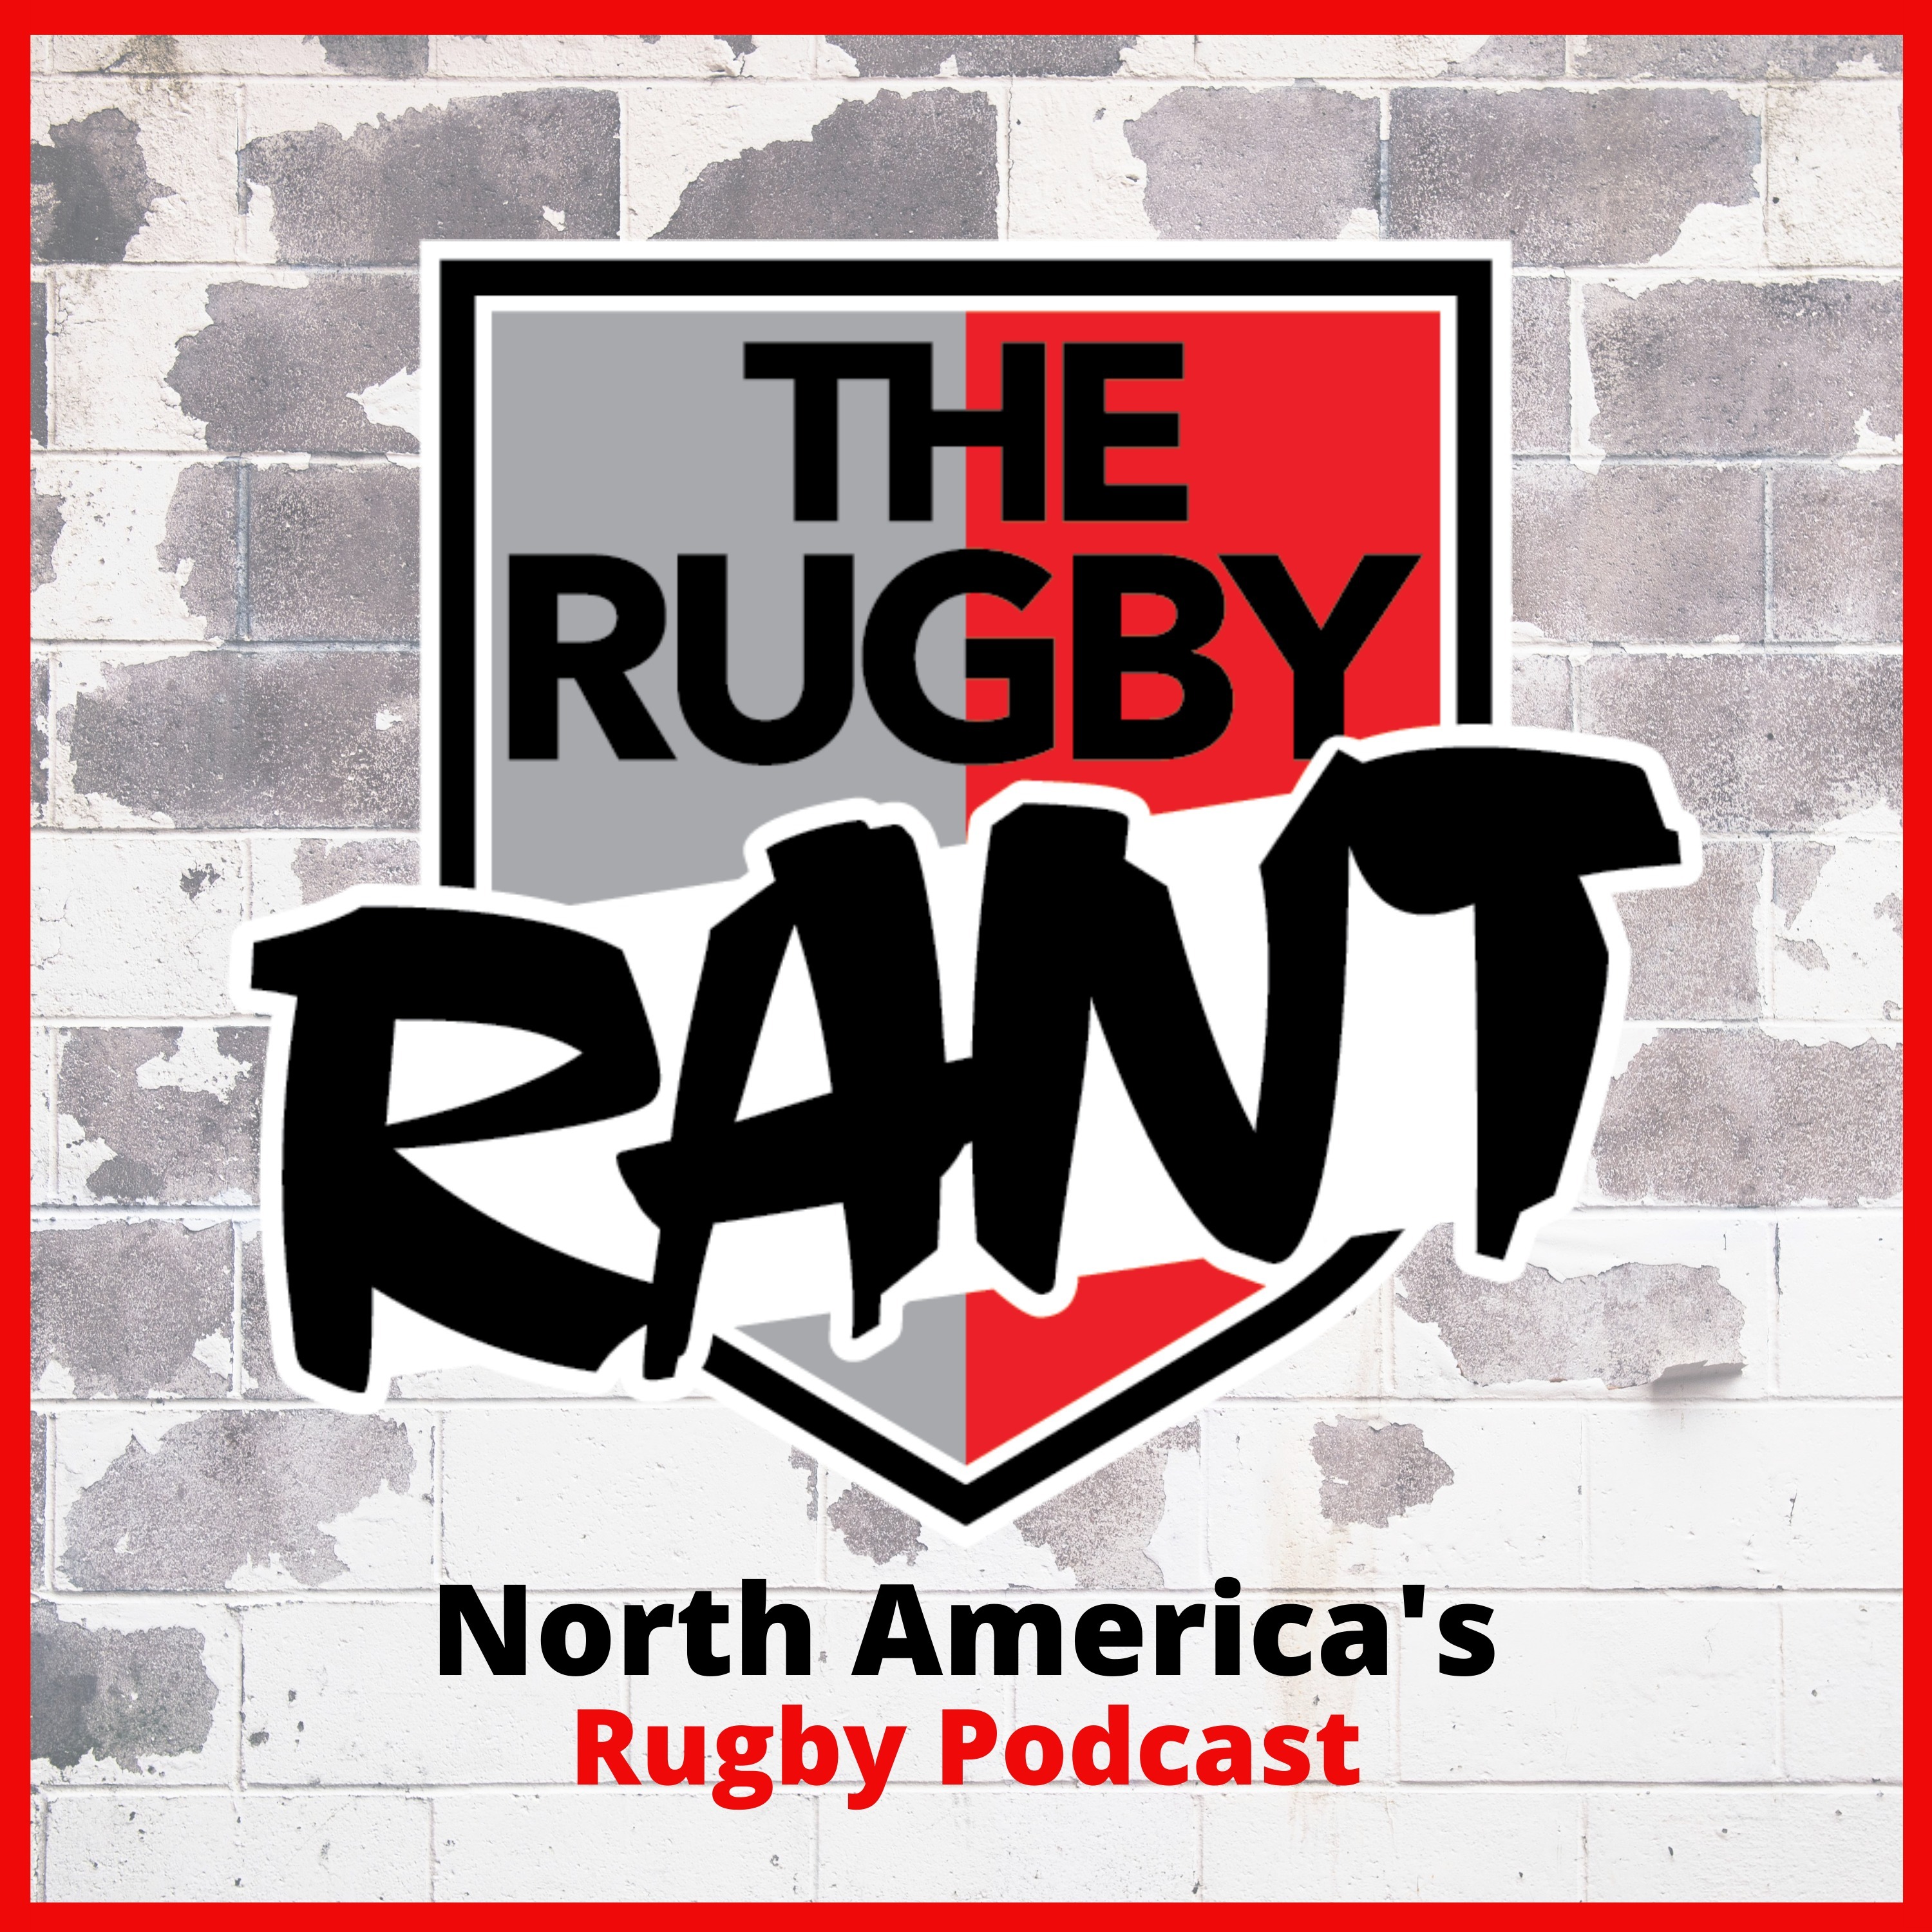 The Rugby Rant - Run, Pass or Kick with Ryan Fitzgerald